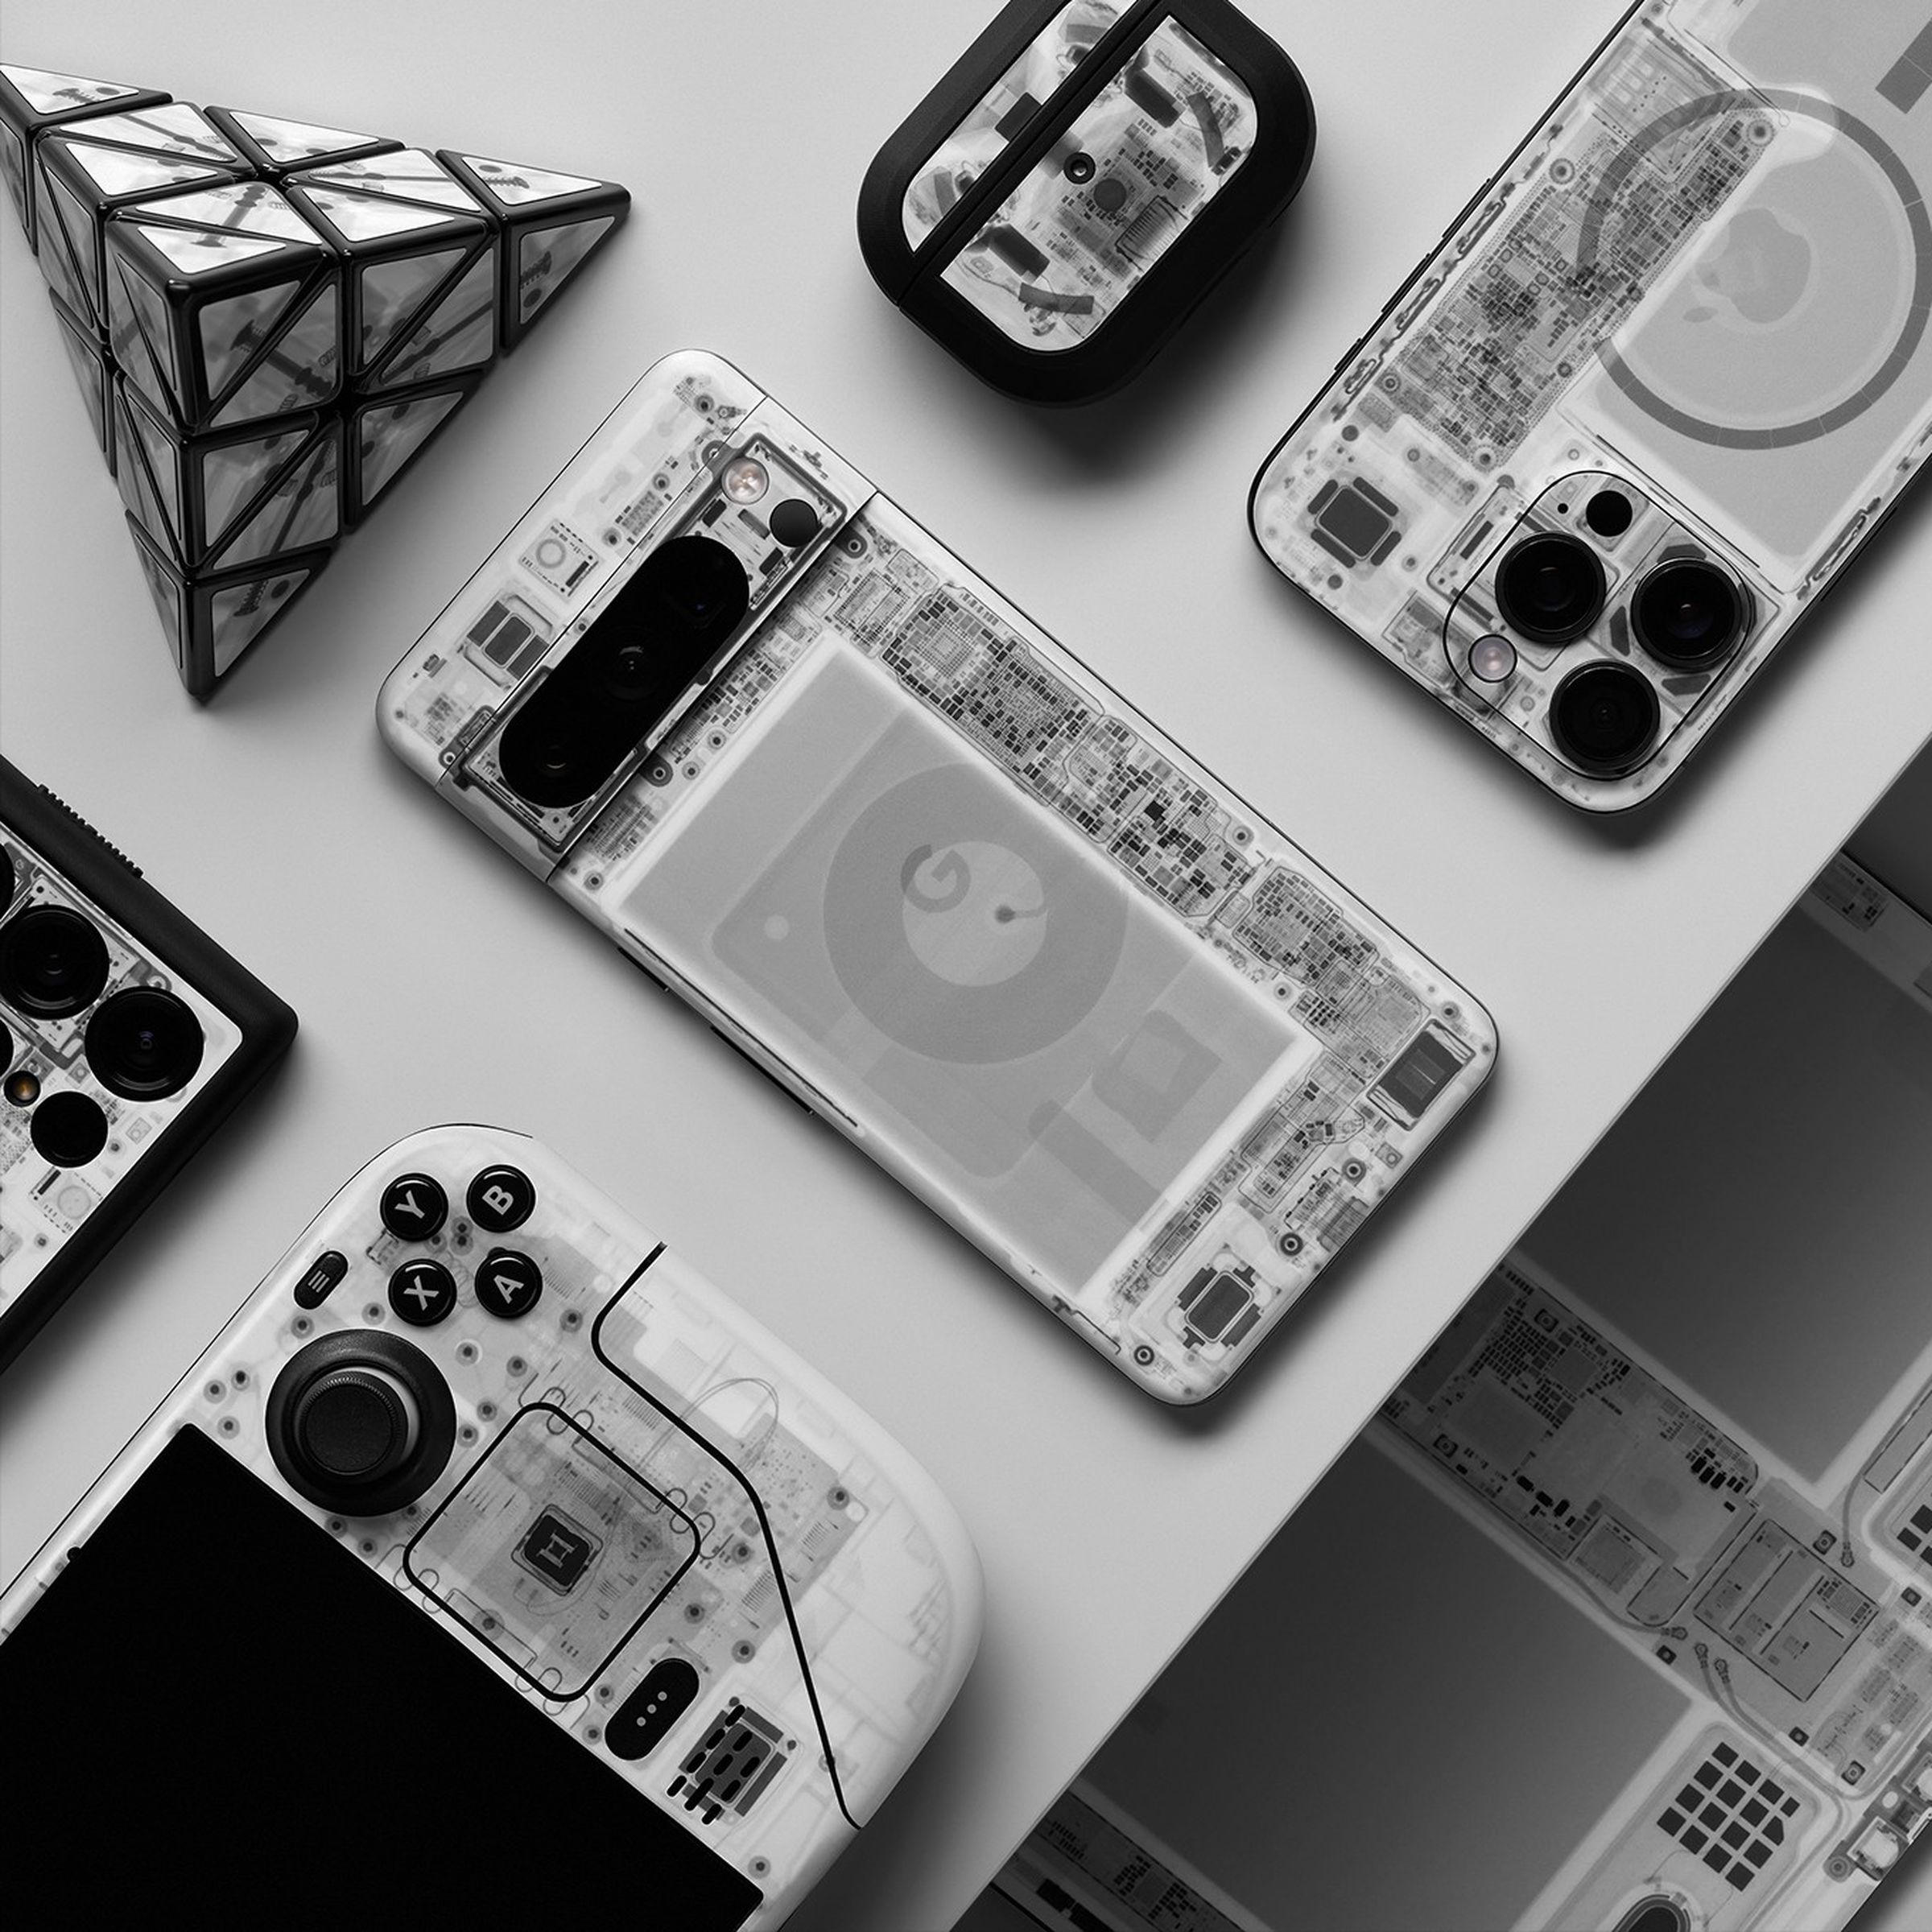 Dbrand’s “Light” X-Ray skins. There are “Dark” ones too.